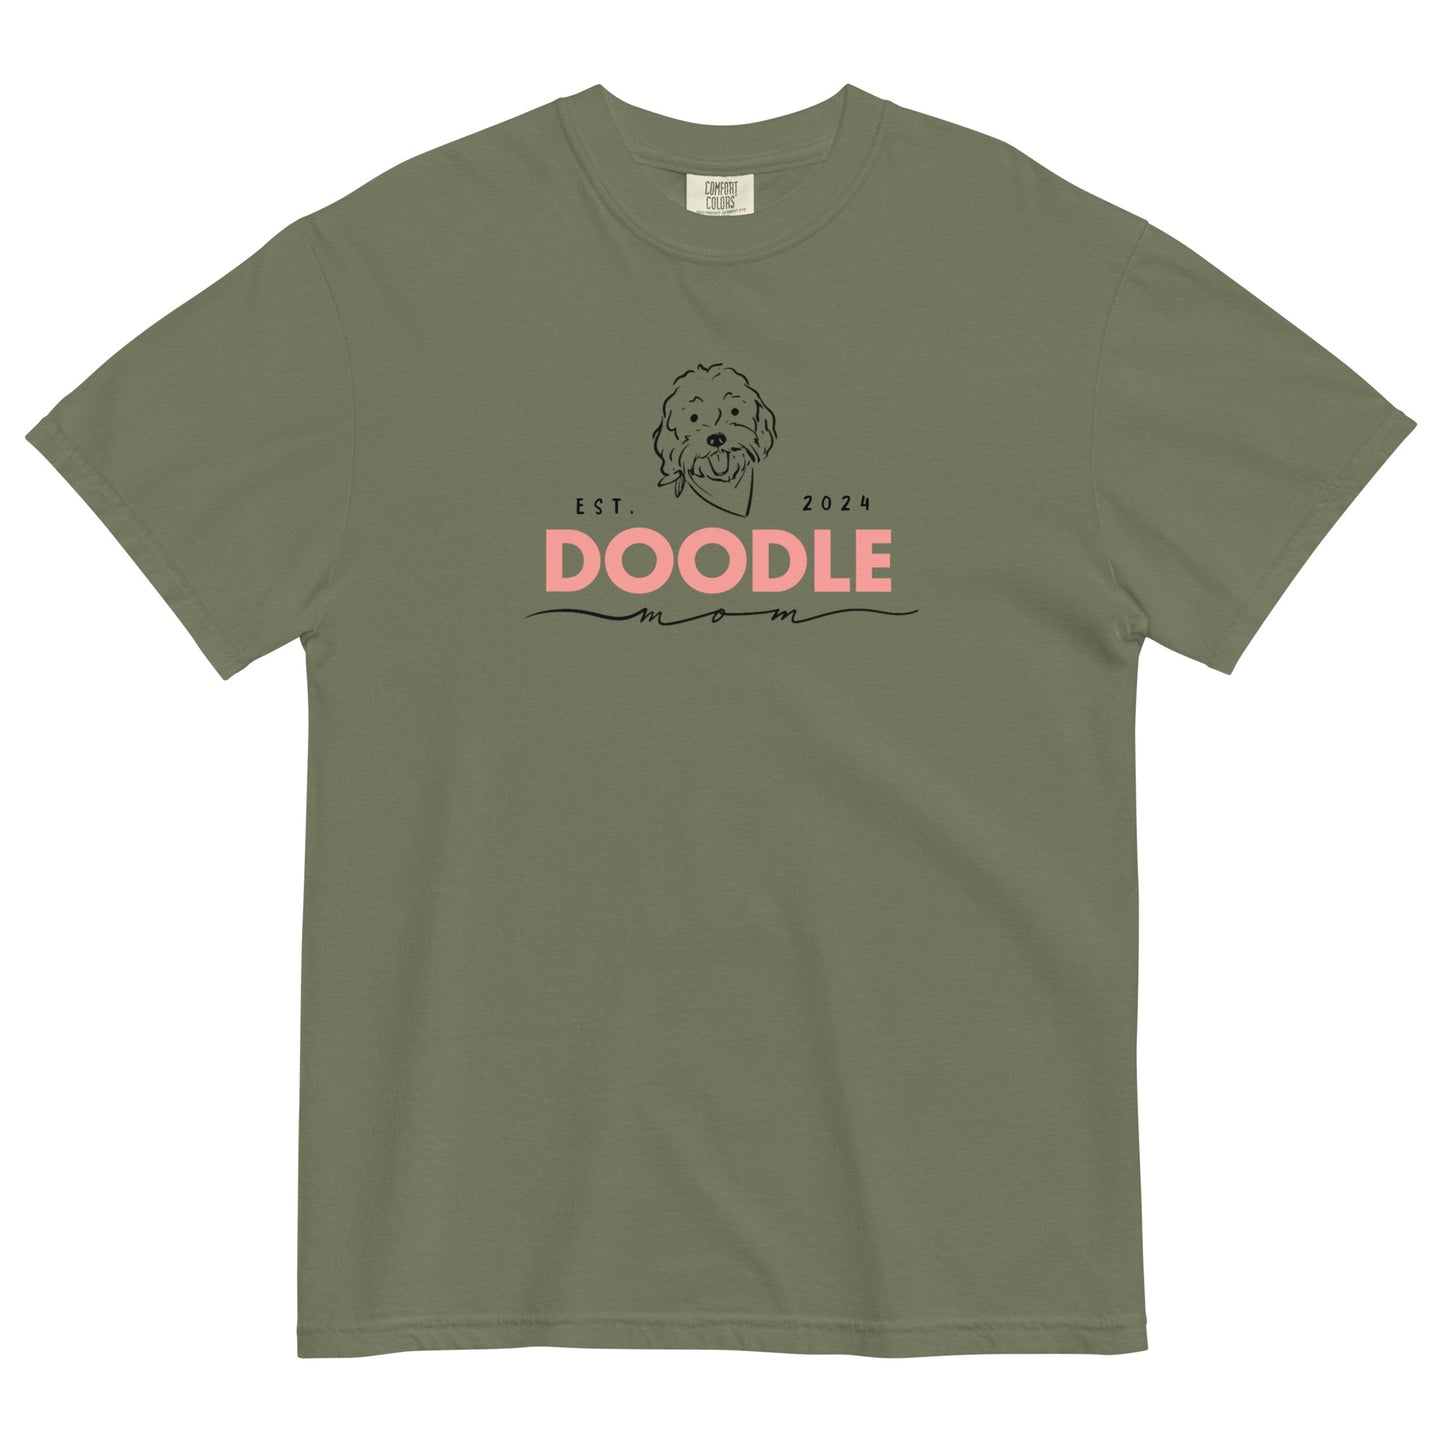 This Goldendoodle shirt features the message, "Doodle Mom Est. 2024" with a cute Doodle dog's face printed on the front. The tag inside the shirt says Comfort Colors